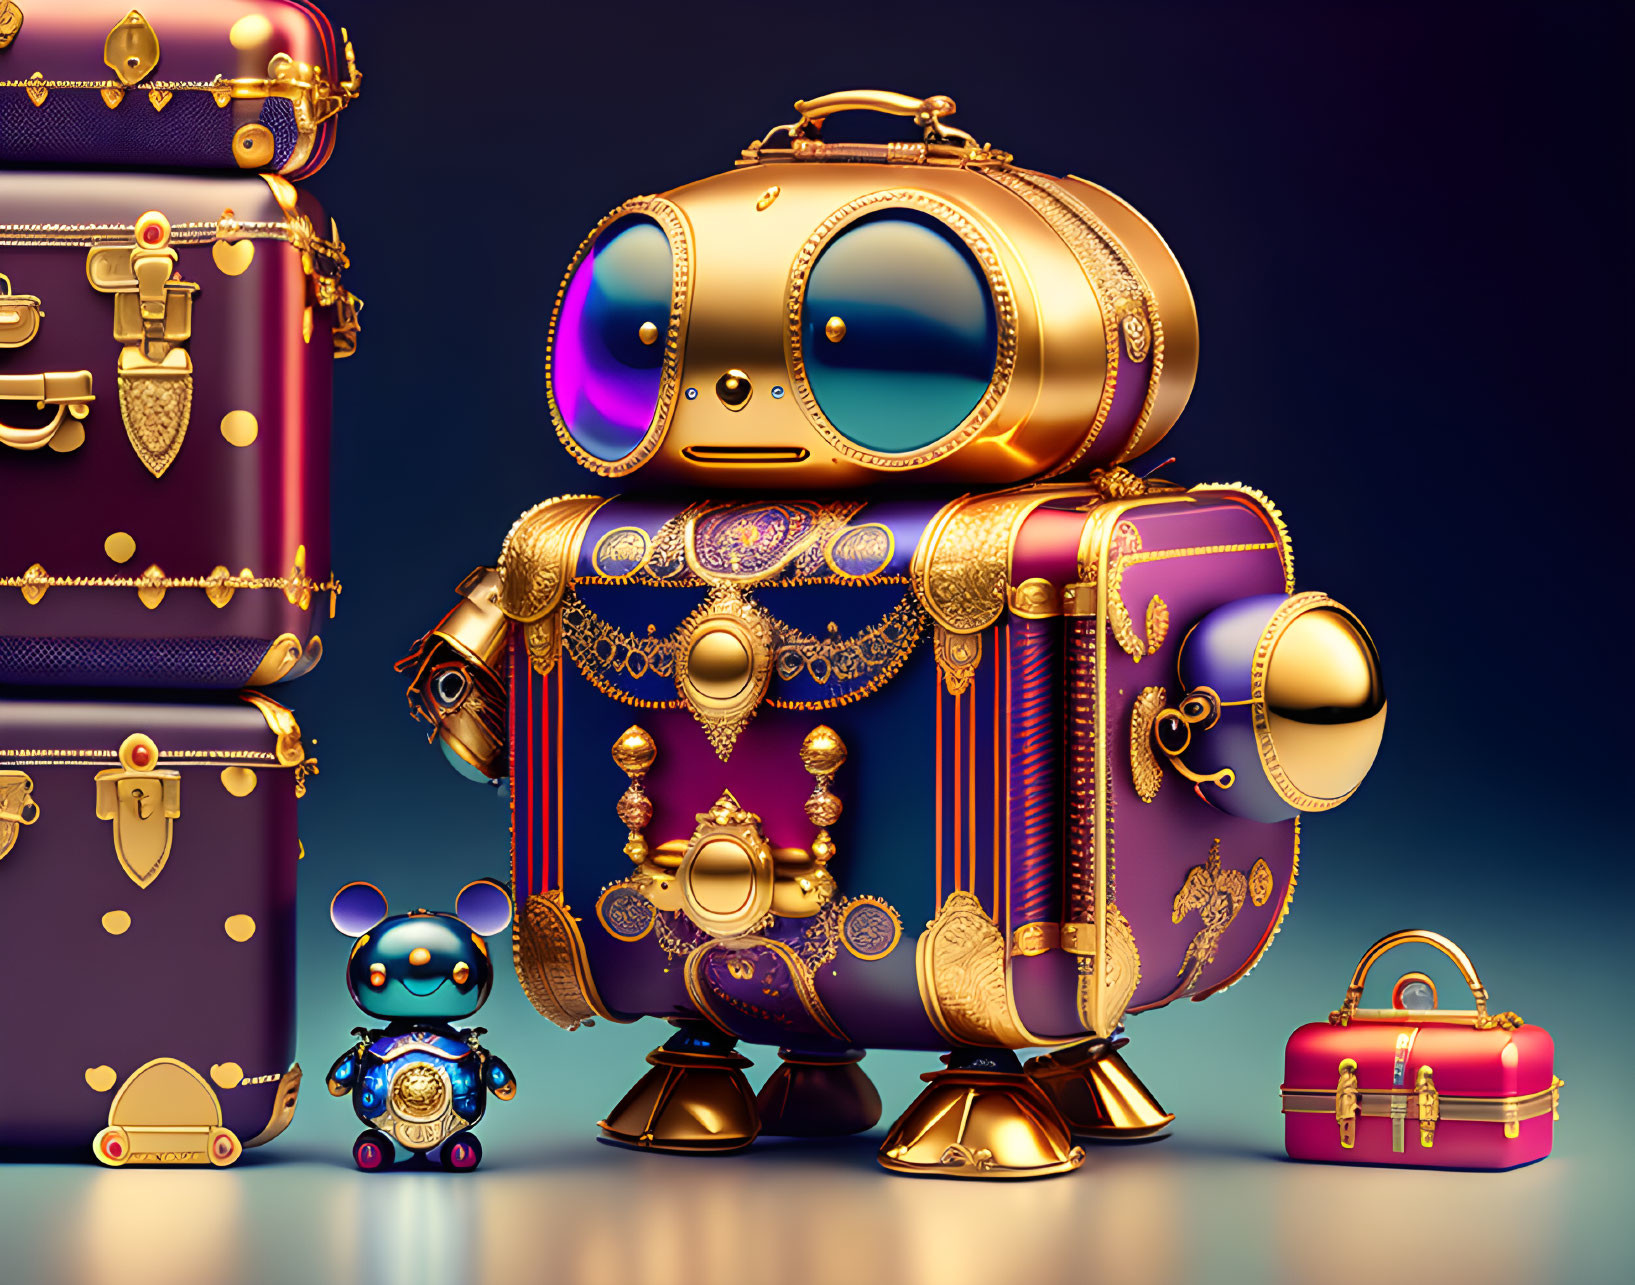 Large Gold and Purple Steampunk Robot with Blue Companion in Vintage Luggage